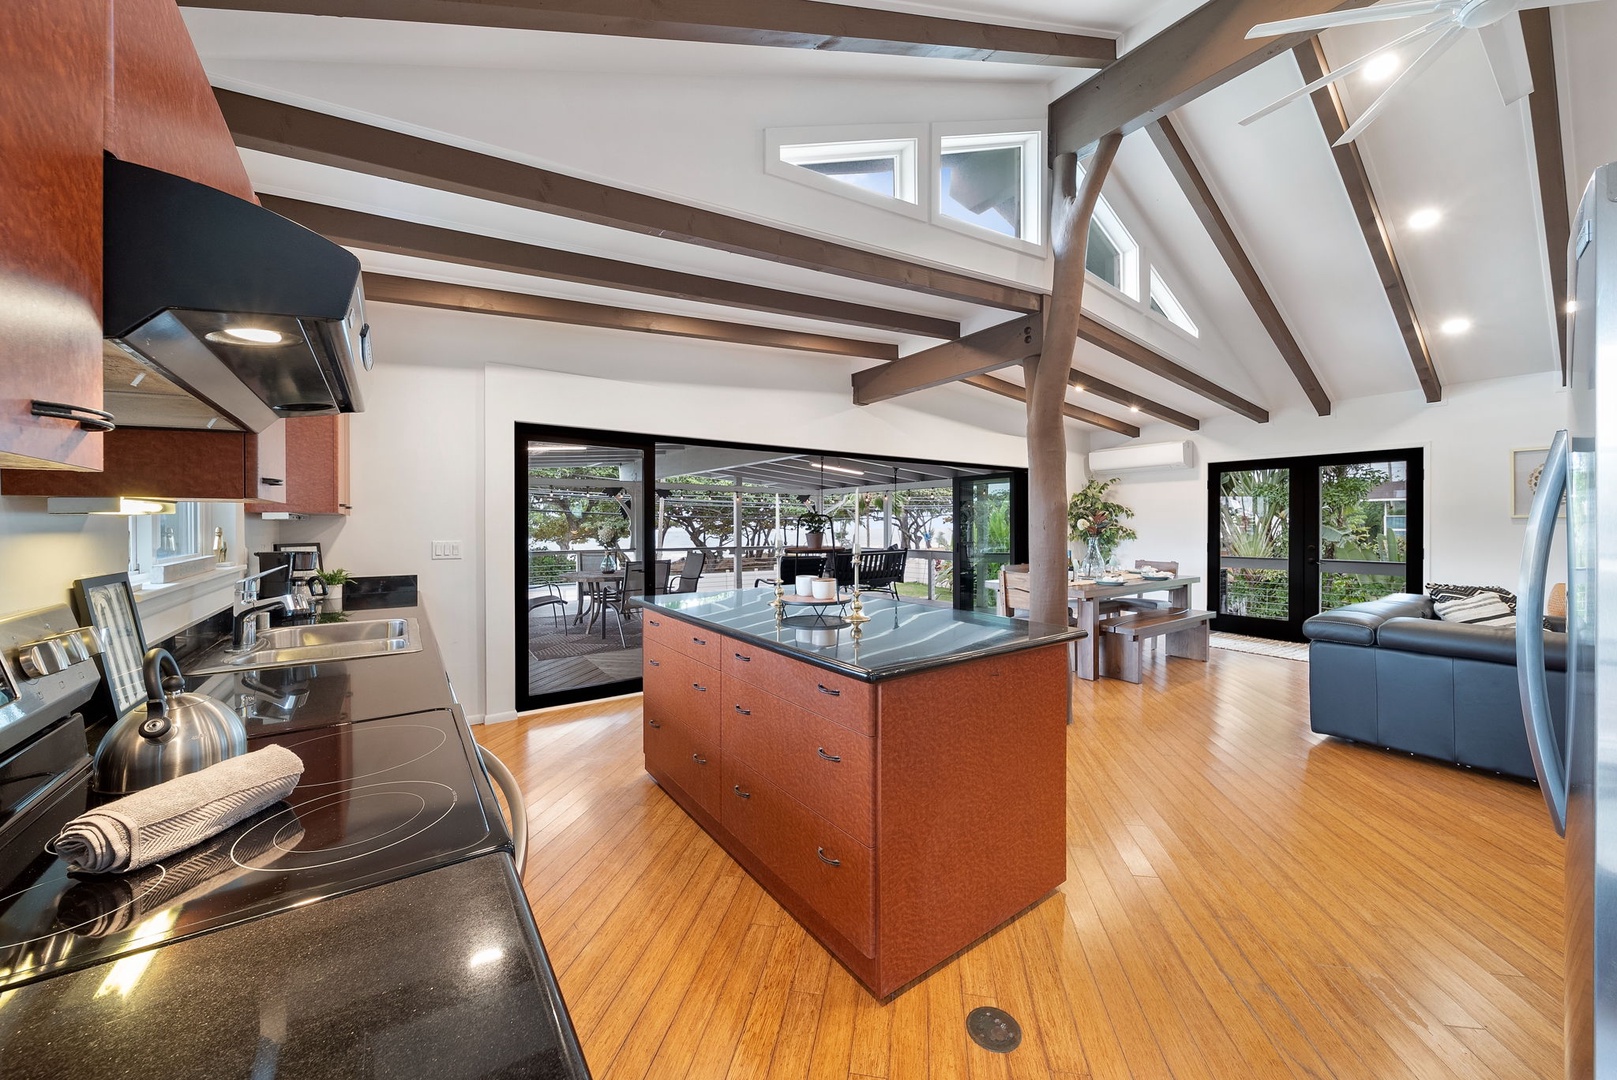 Kaaawa Vacation Rentals, Kualoa Ohia - Newly remodeled kitchen with all the essentials